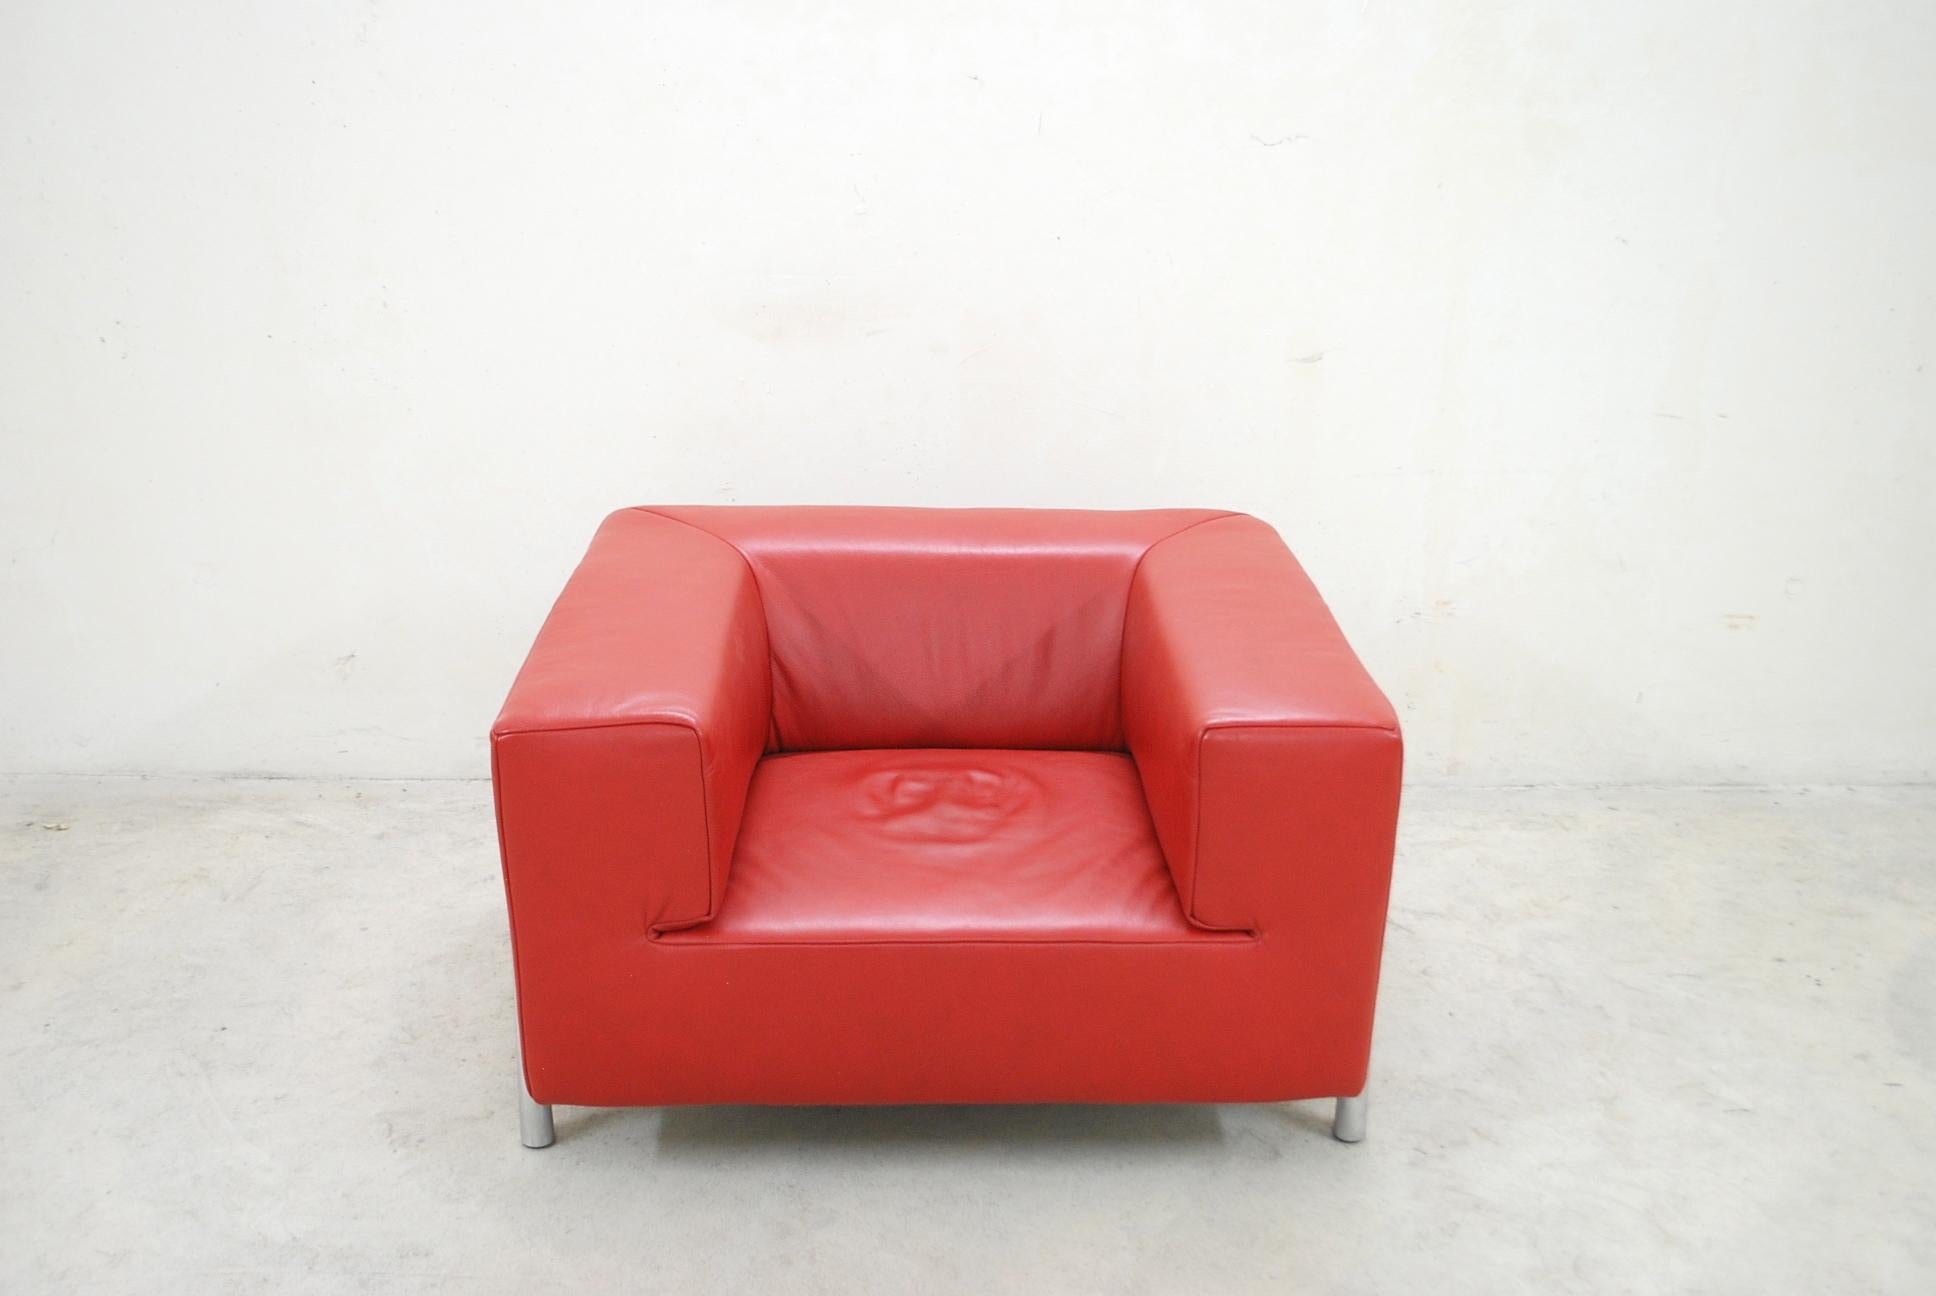 Model Genesis and design by Cynthia Starnes for German manufacture Koinor.
Red rosso aniline leather.
The feet is in aluminium and is also designed like a sculpture.
An extraordinary design.